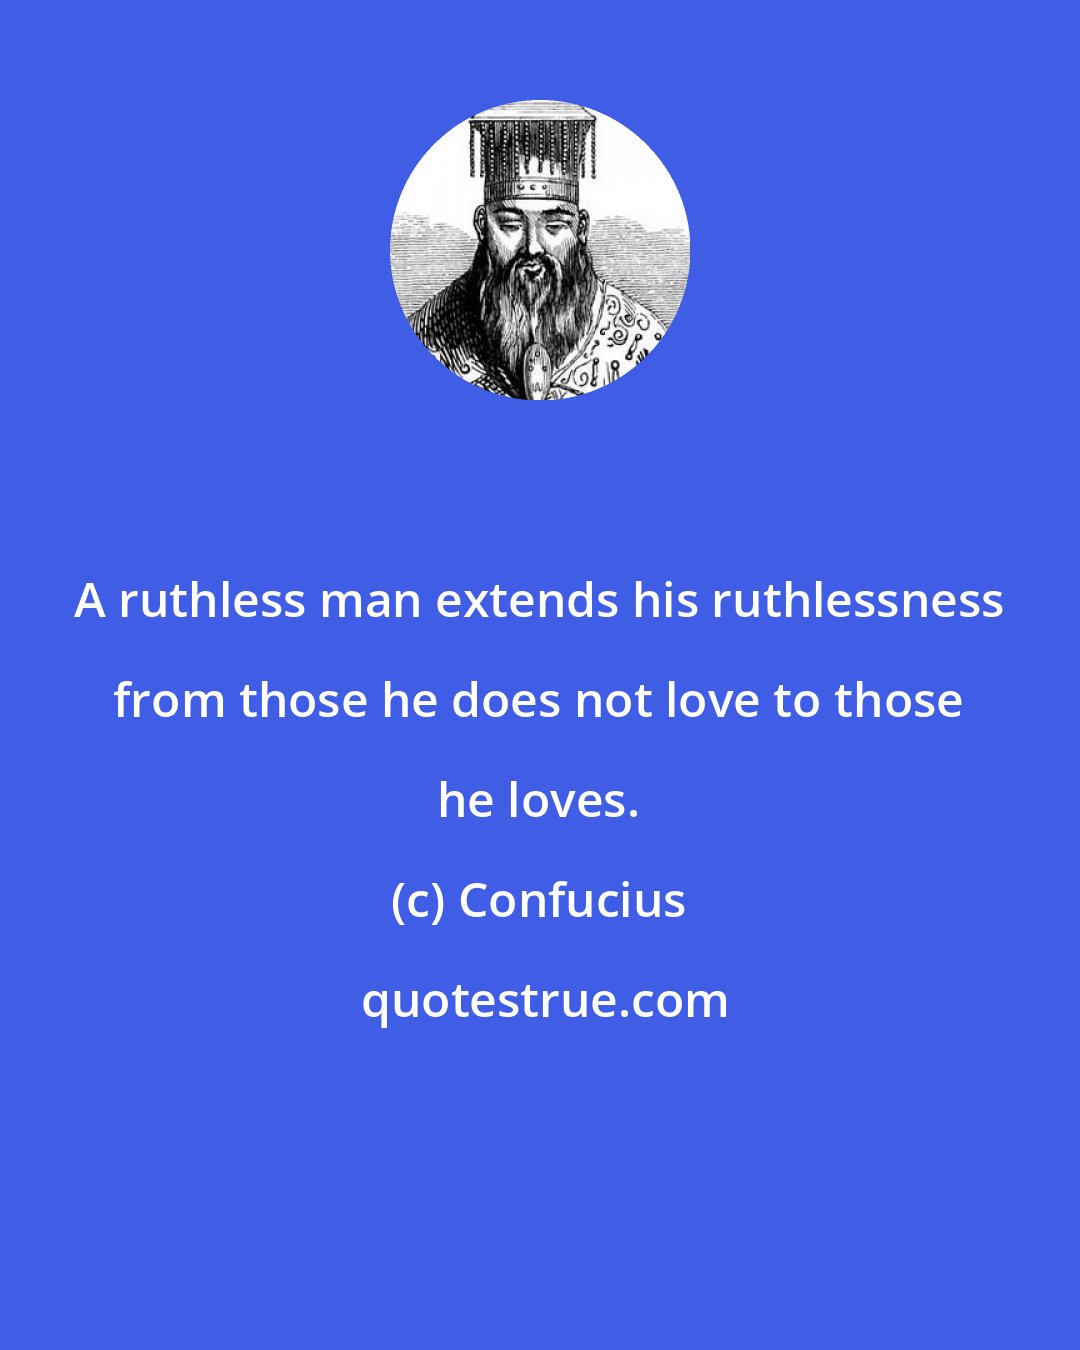 Confucius: A ruthless man extends his ruthlessness from those he does not love to those he loves.